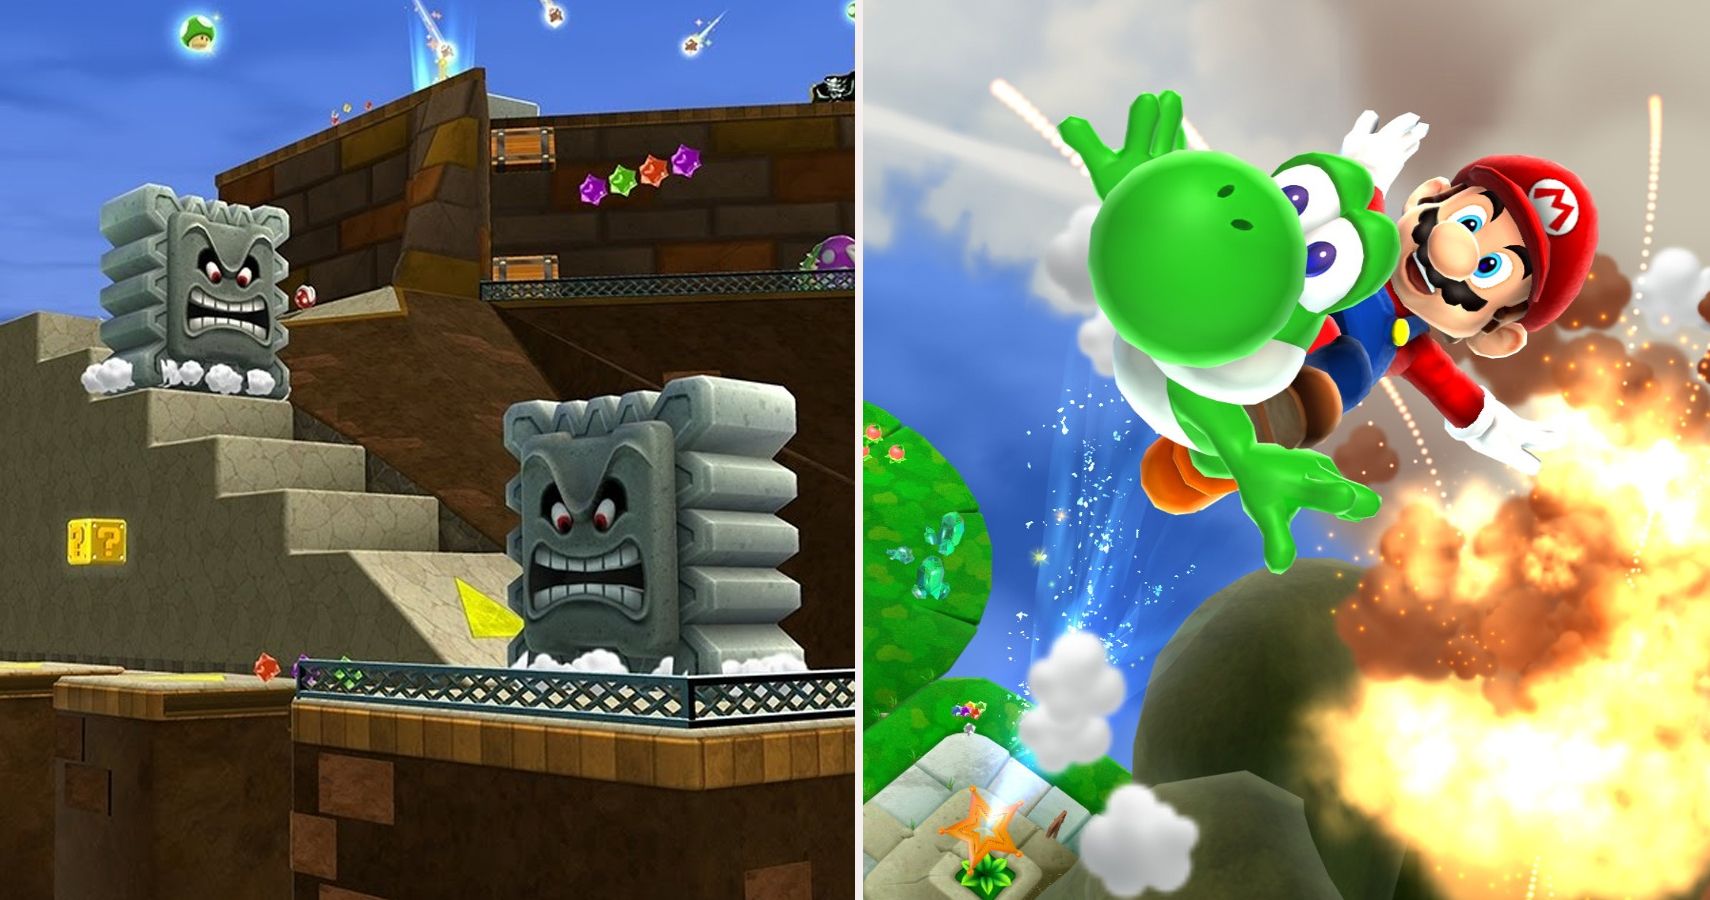 10 Things Super Mario Galaxy 2 Improved Over Its Predecessor